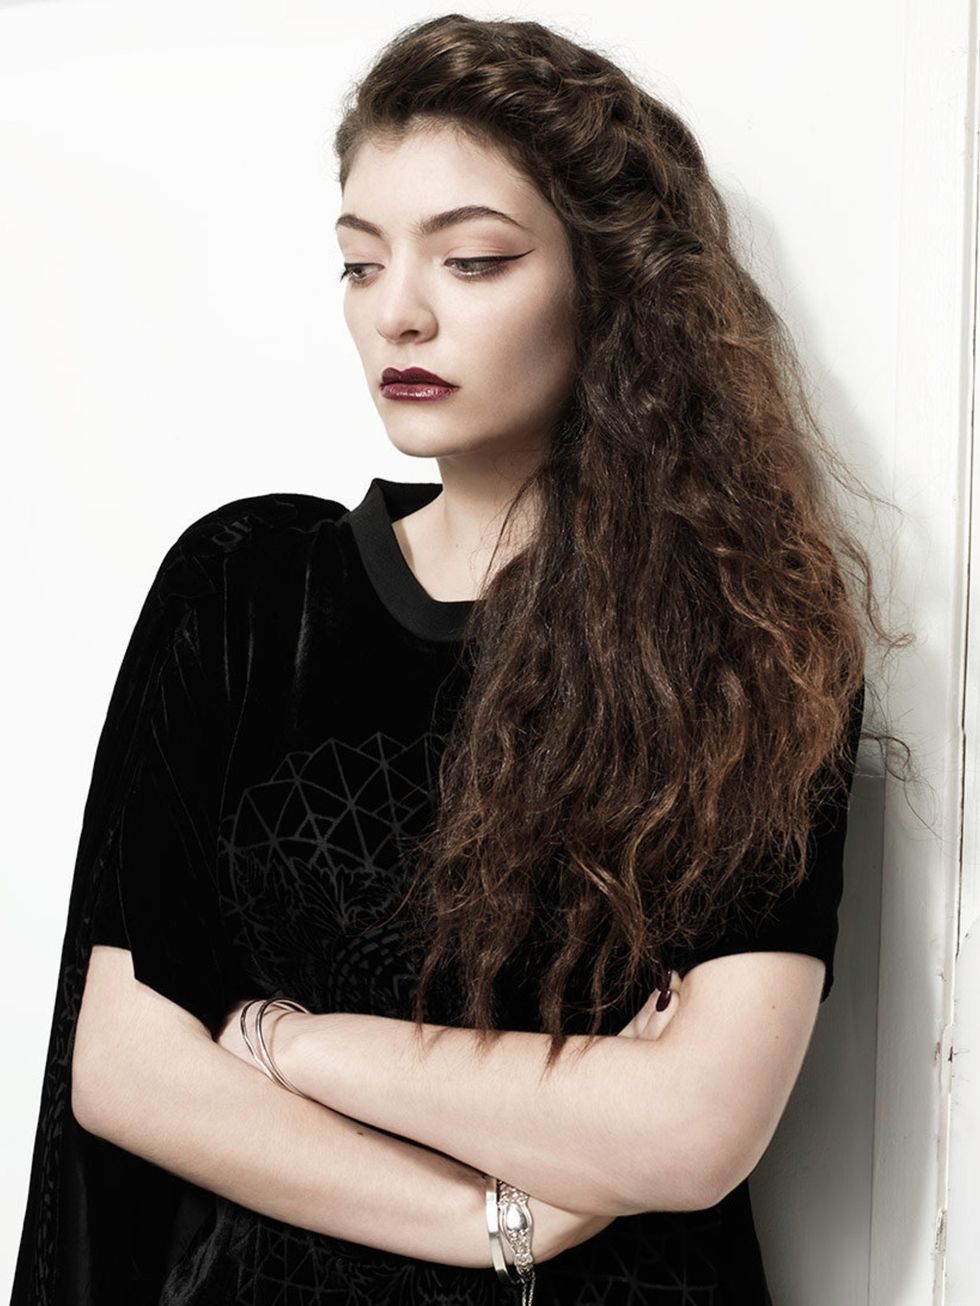 <p>Lorde:</p><p>Having already done <a href="http://www.elleuk.com/style/occasions/coachella-2014-celebrity-fashion">Coachella</a> and picked up a few <a href="http://www.elleuk.com/star-style/news/grammys-top-five-performances-beyonce-jay-z-macklemore-ma